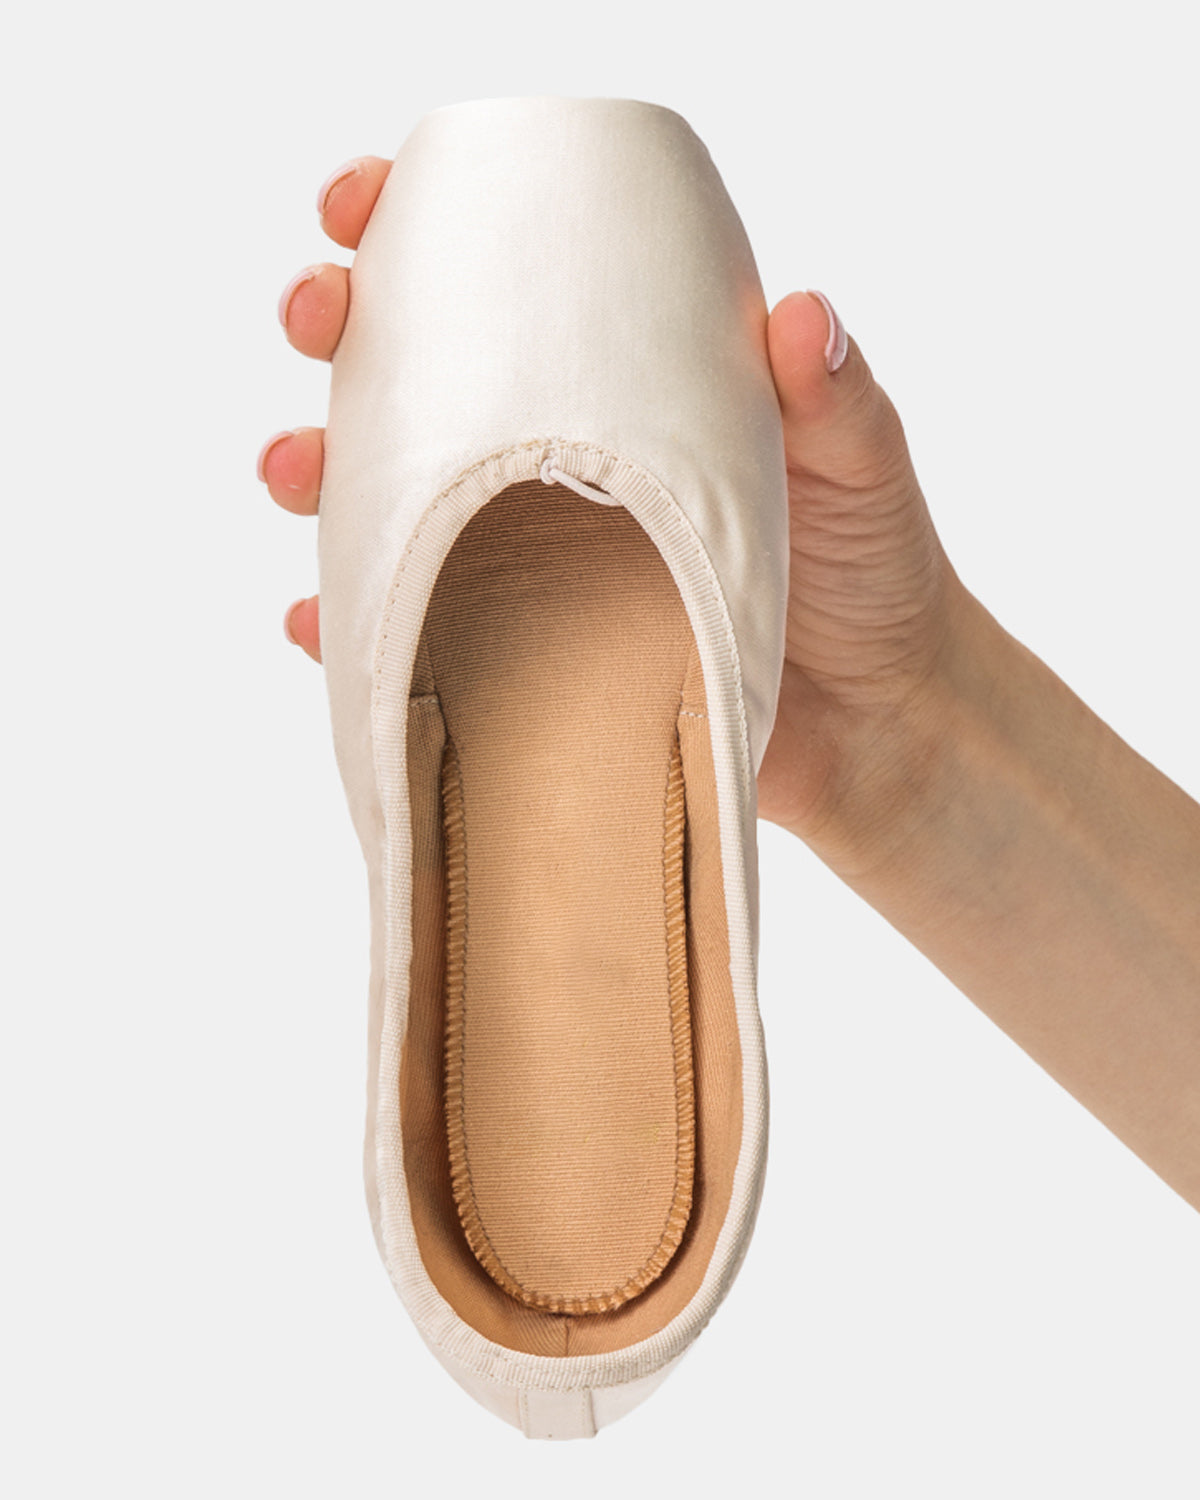 What Are Demi Pointe Shoes?